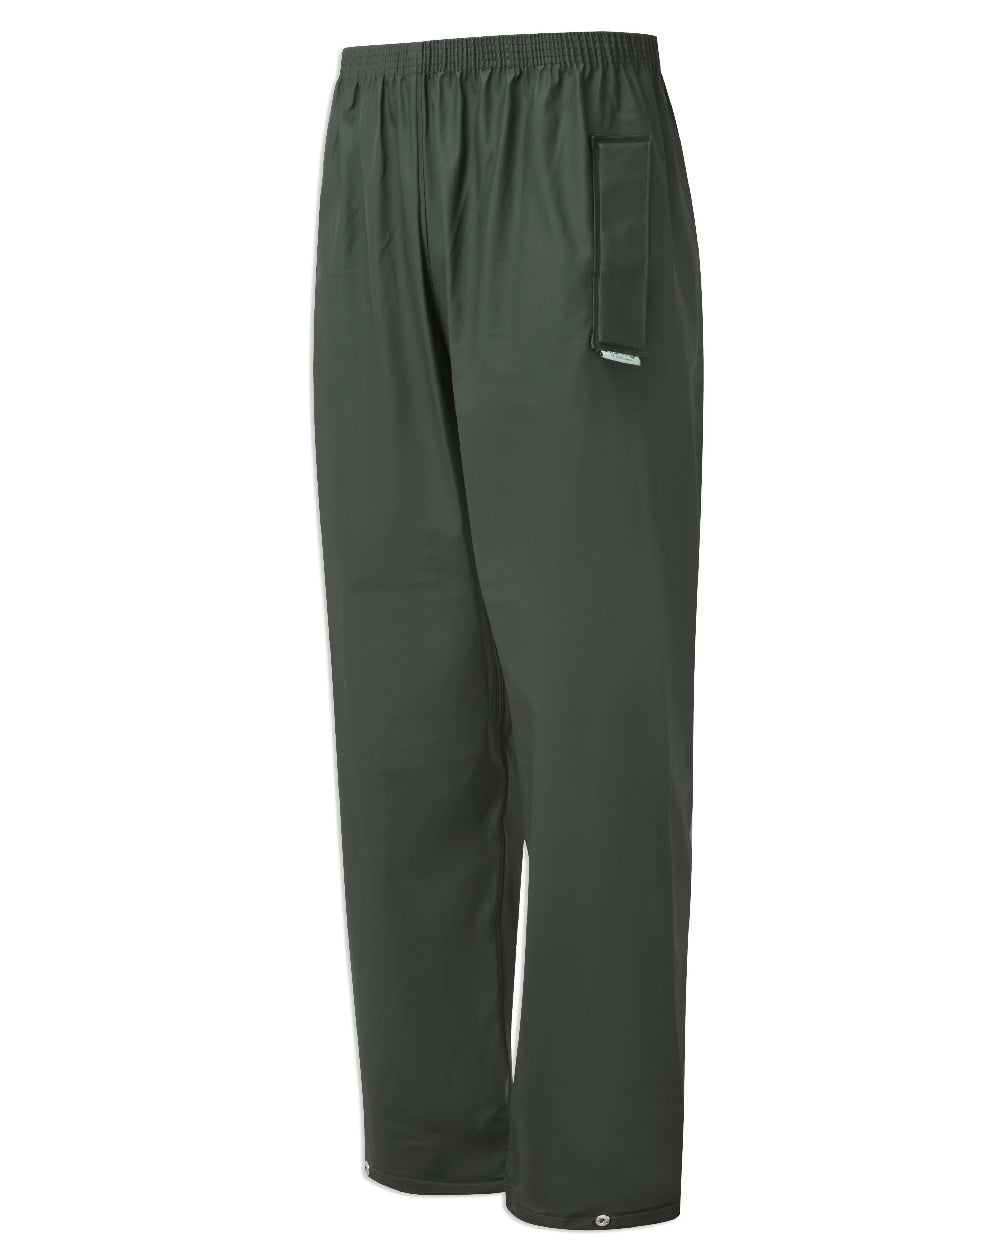 Cutter  Buck Waterproof Trousers  Trousers from County Golf  Golf Sale   Golf Clothing  Discount